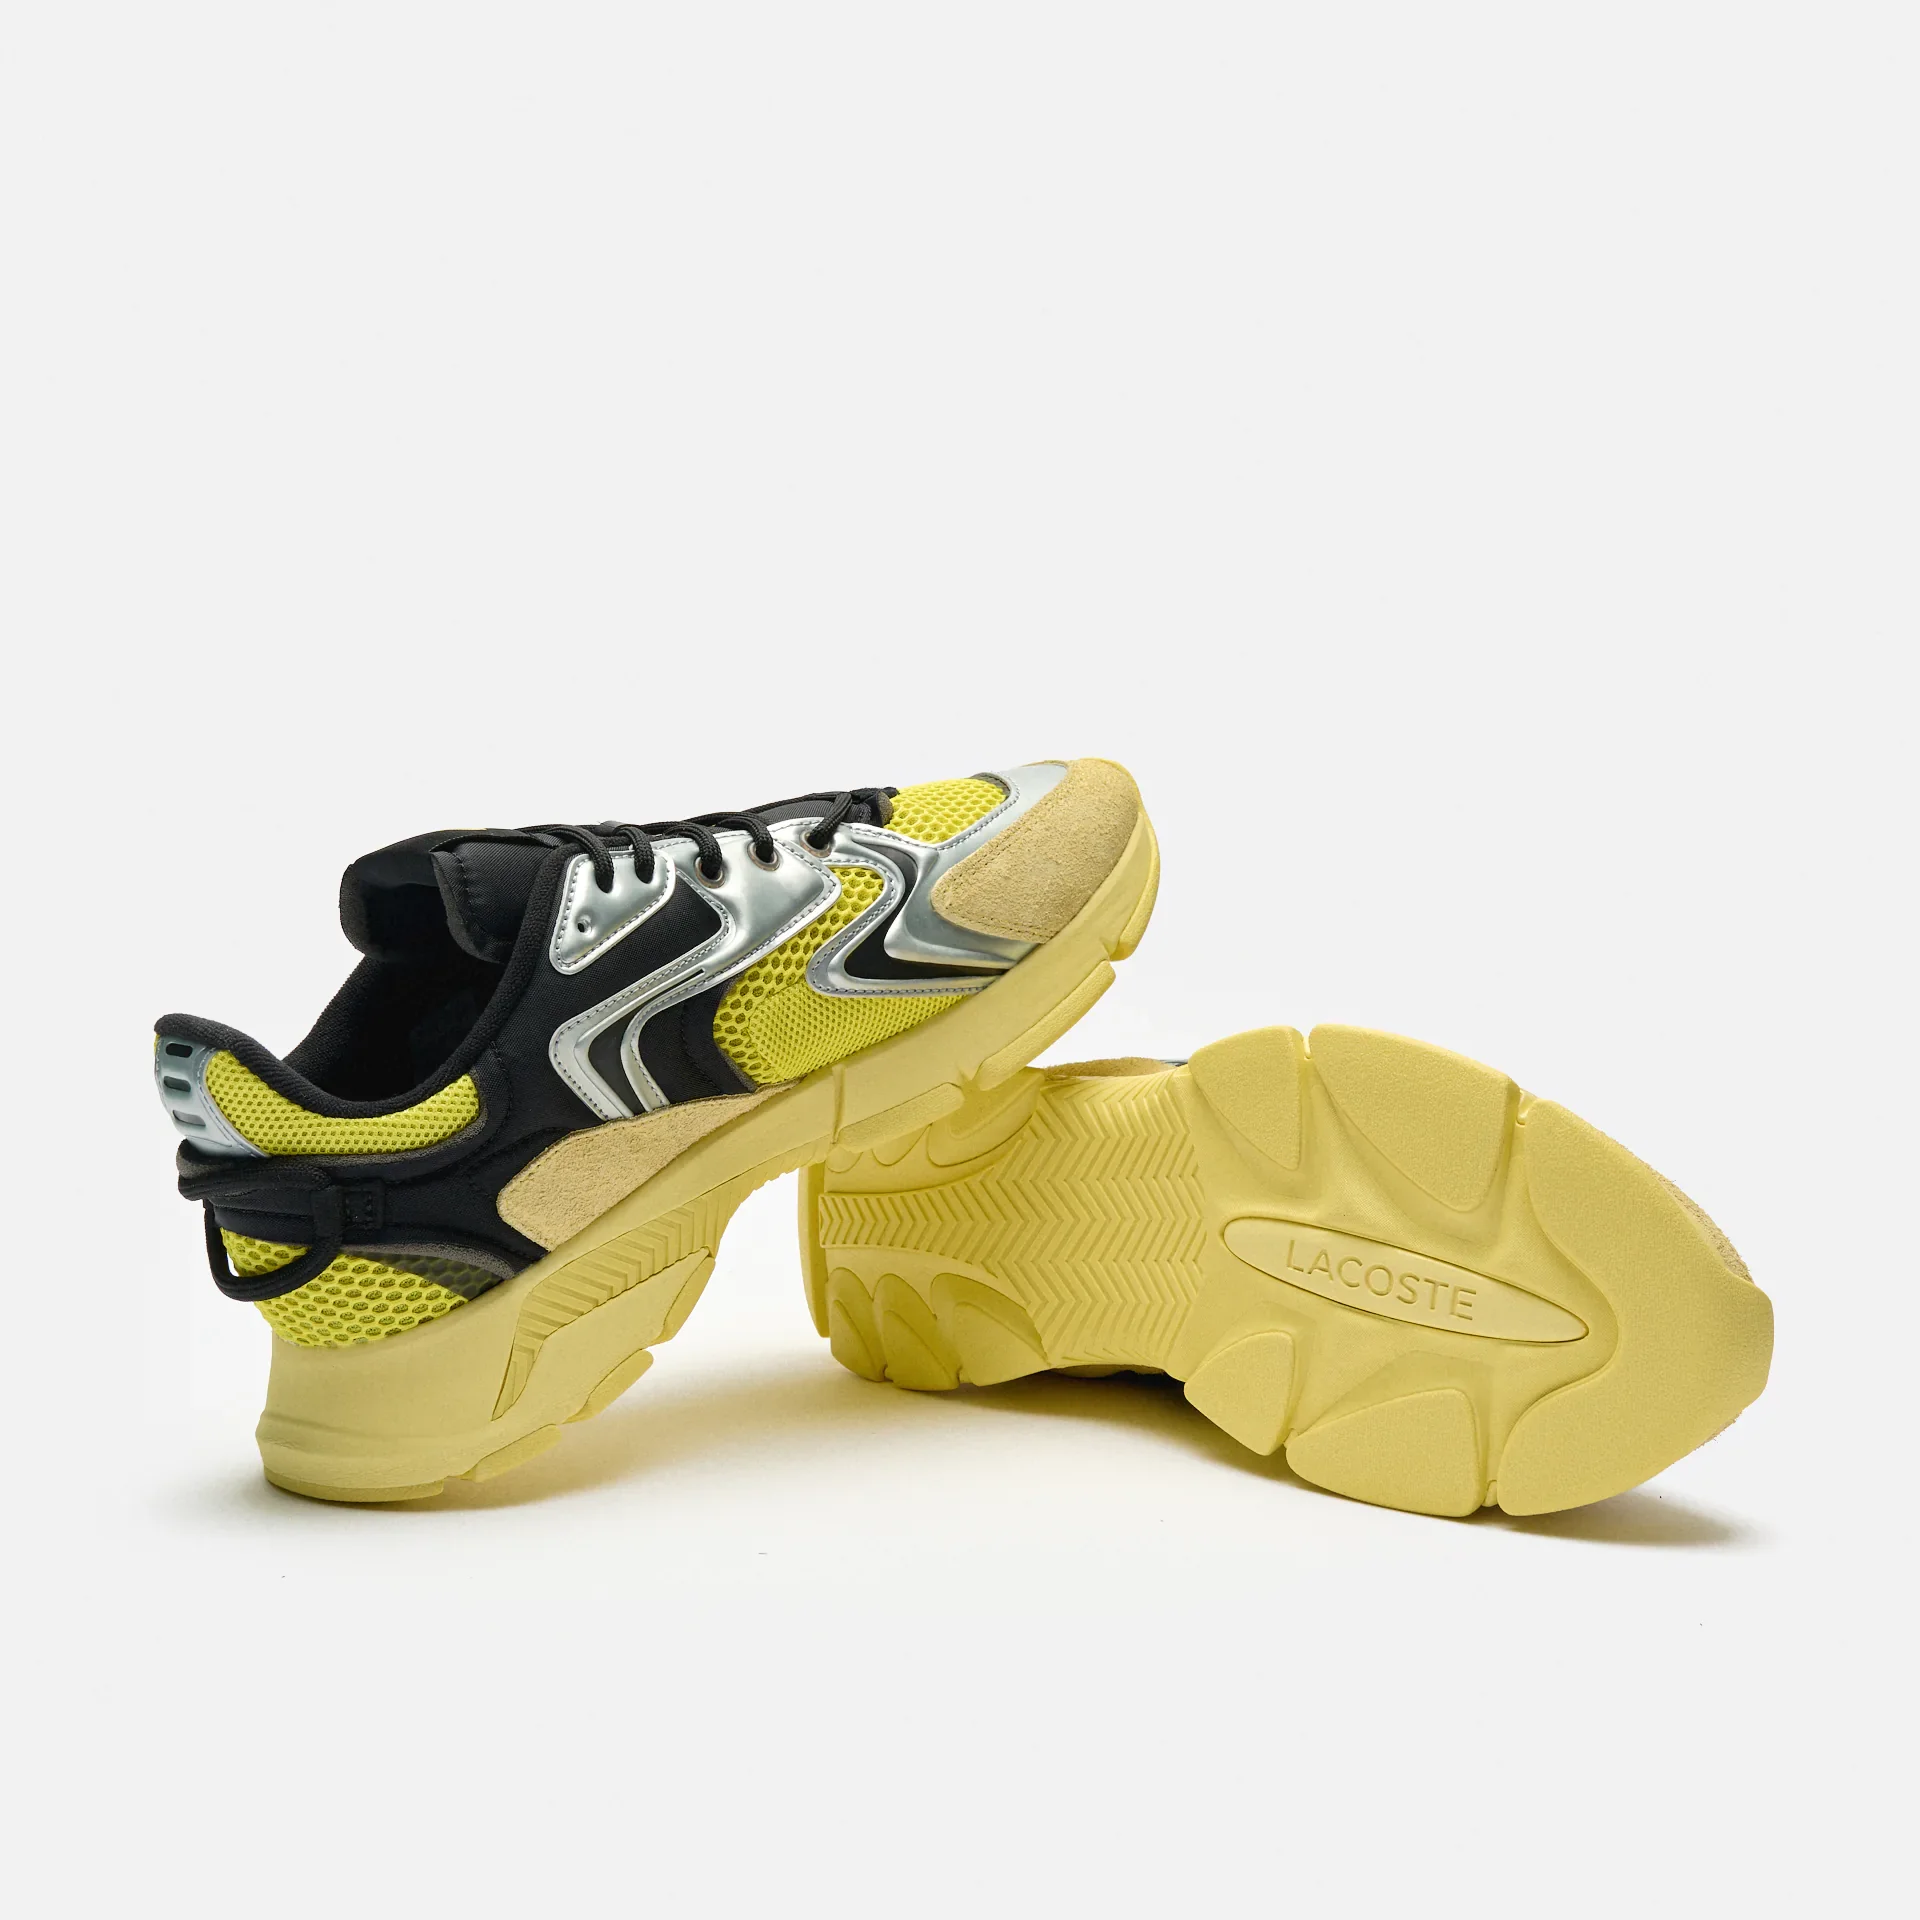 Lacoste L003 Neo Contrasted Textile Sneaker Yellow/Black